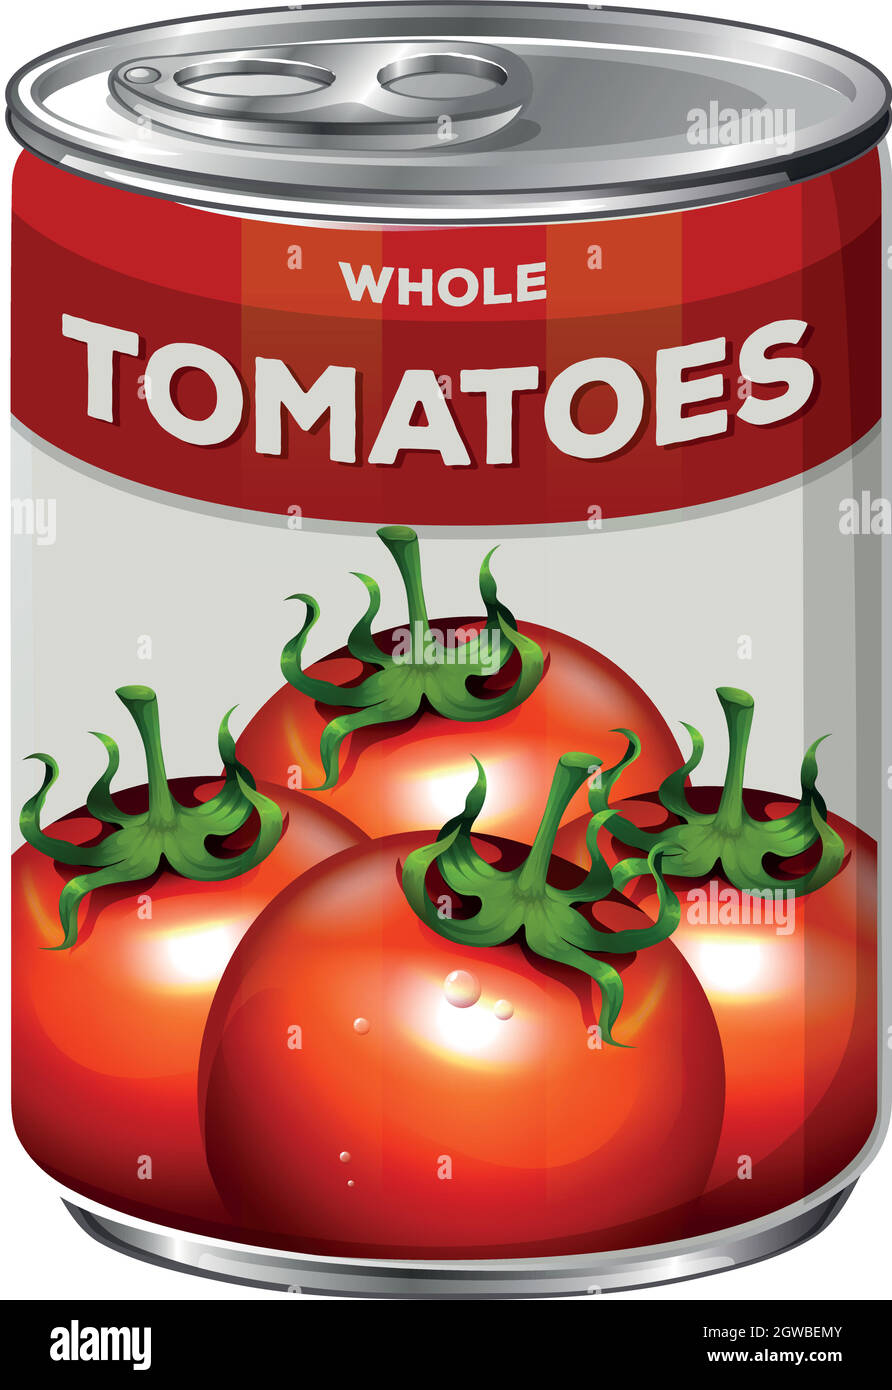 A Can of Whole Tomatoes Stock Vector